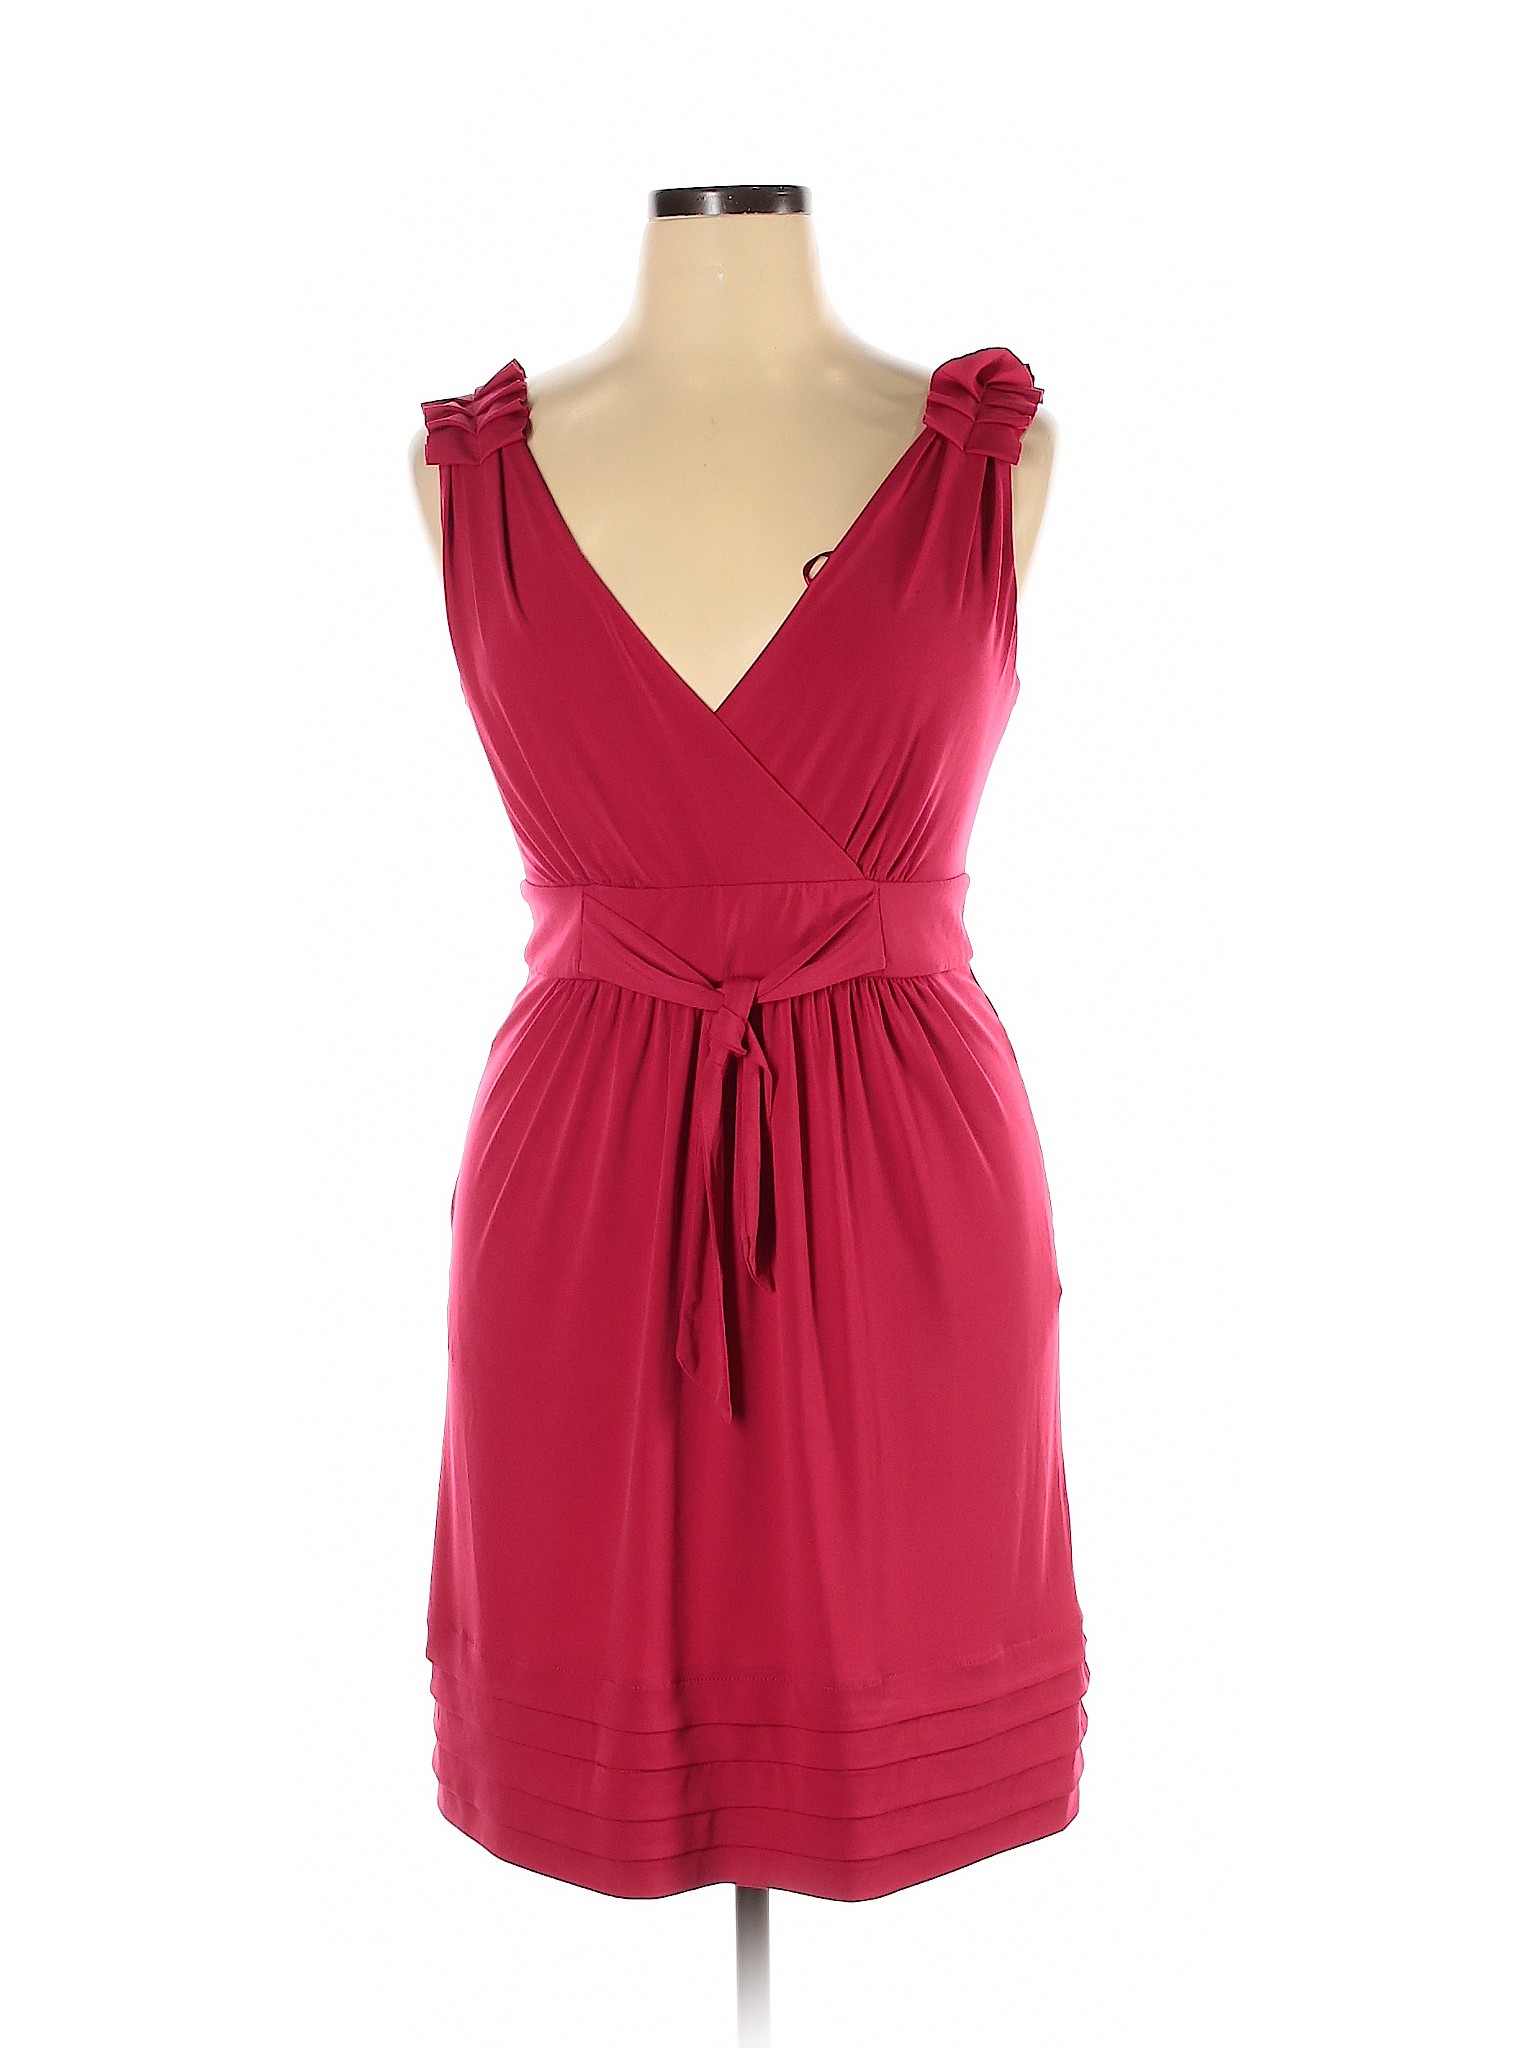 Max and Cleo Women Red Cocktail Dress 14 | eBay